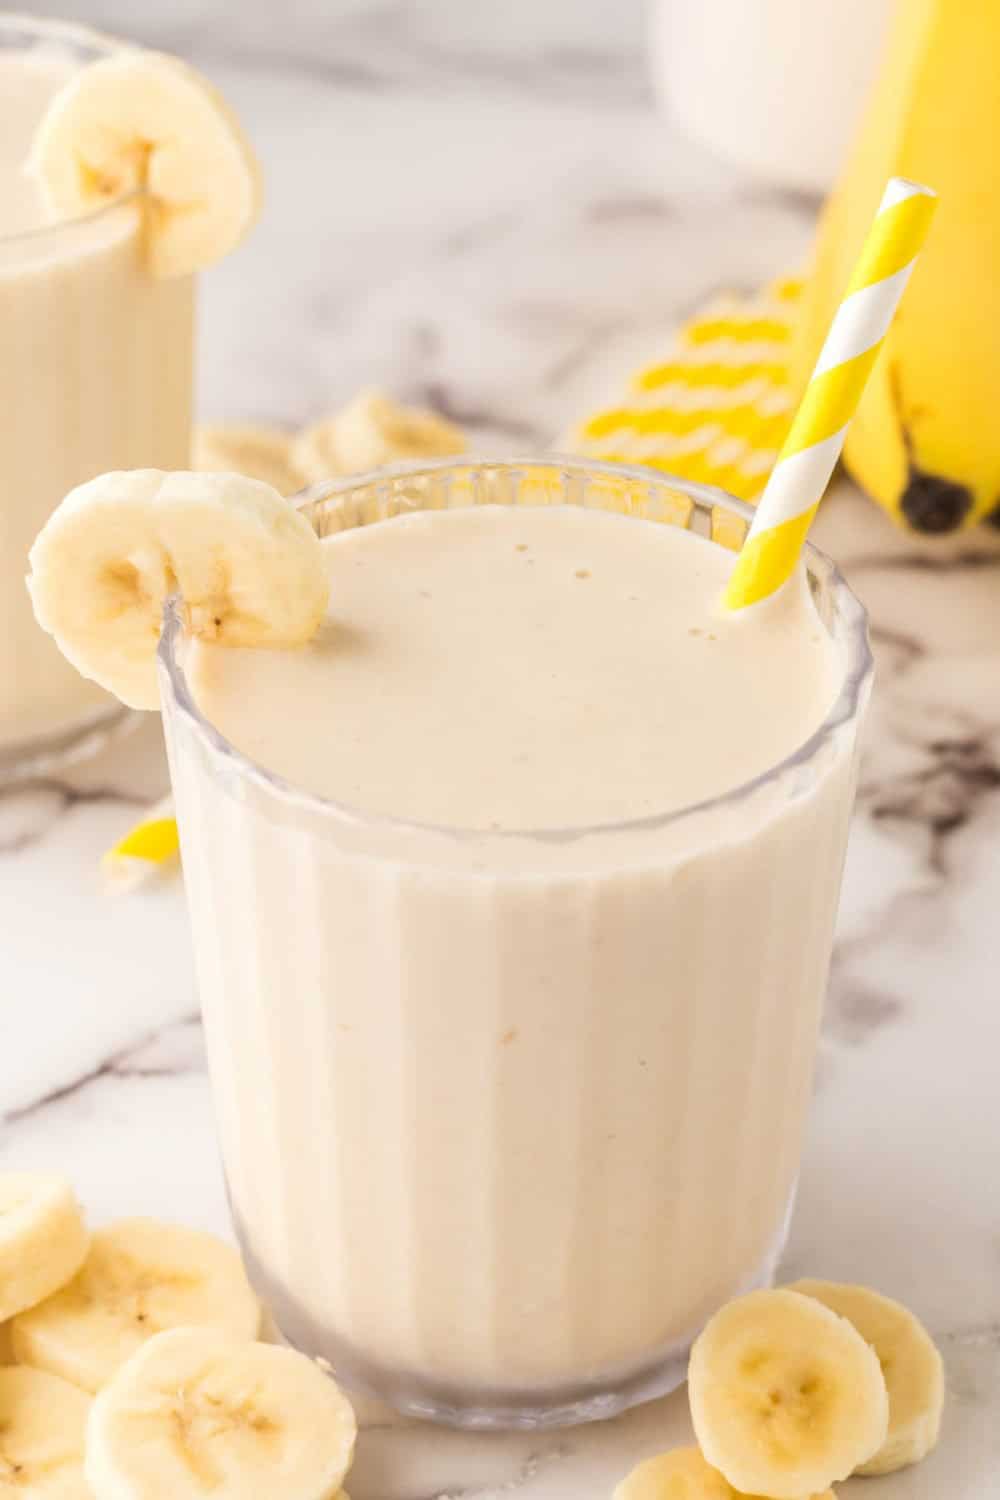 Delicious banana smoothie in a glass with a straw.